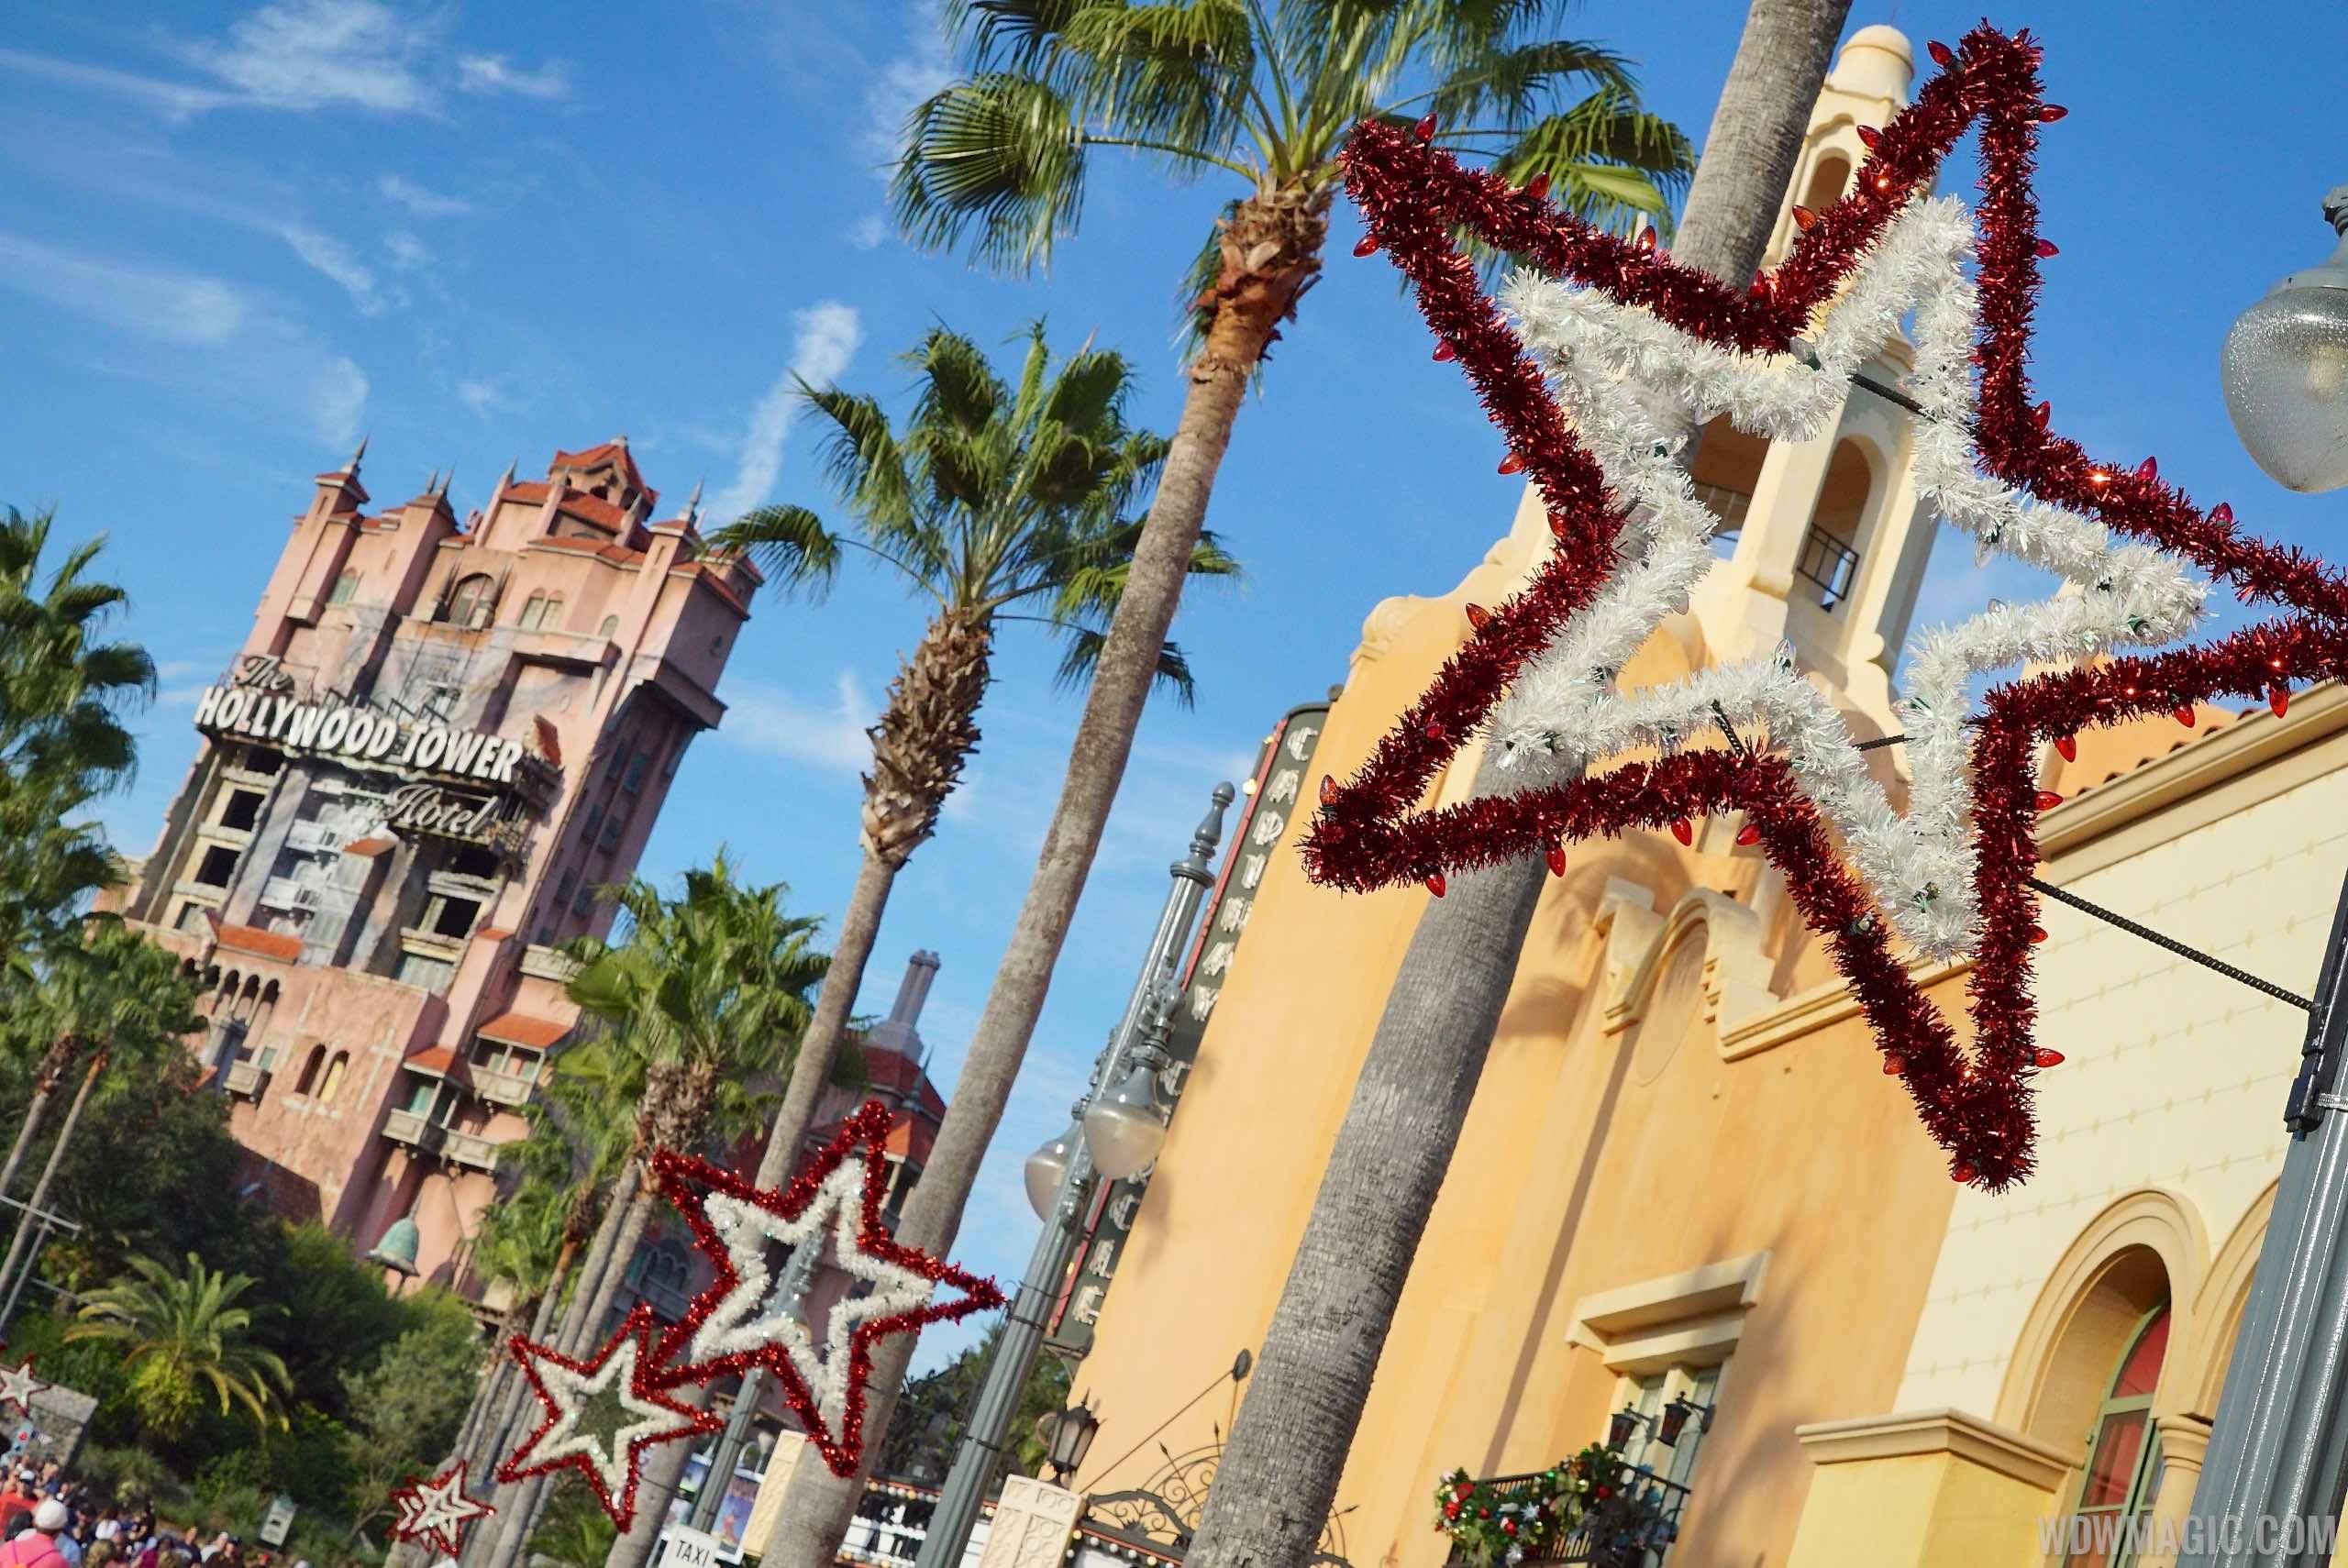 Holidays at Disney's Hollywood Studios overview